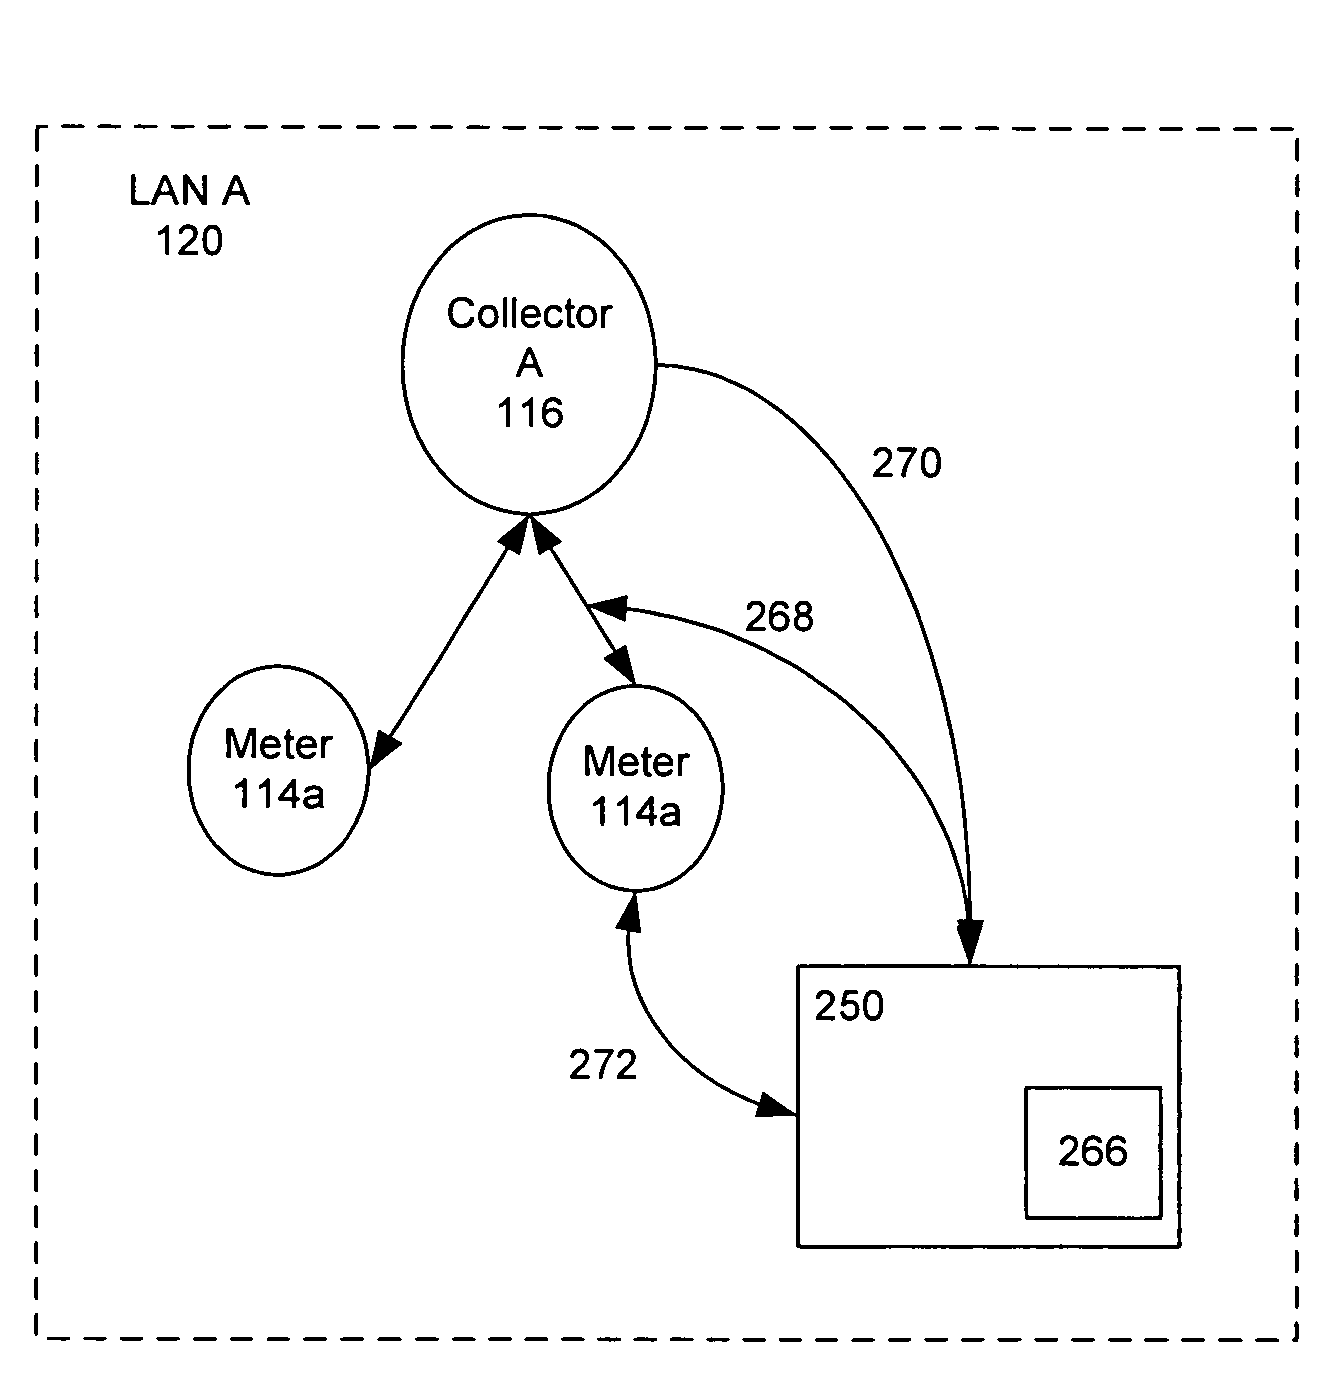 In-home display communicates with a fixed network meter reading system